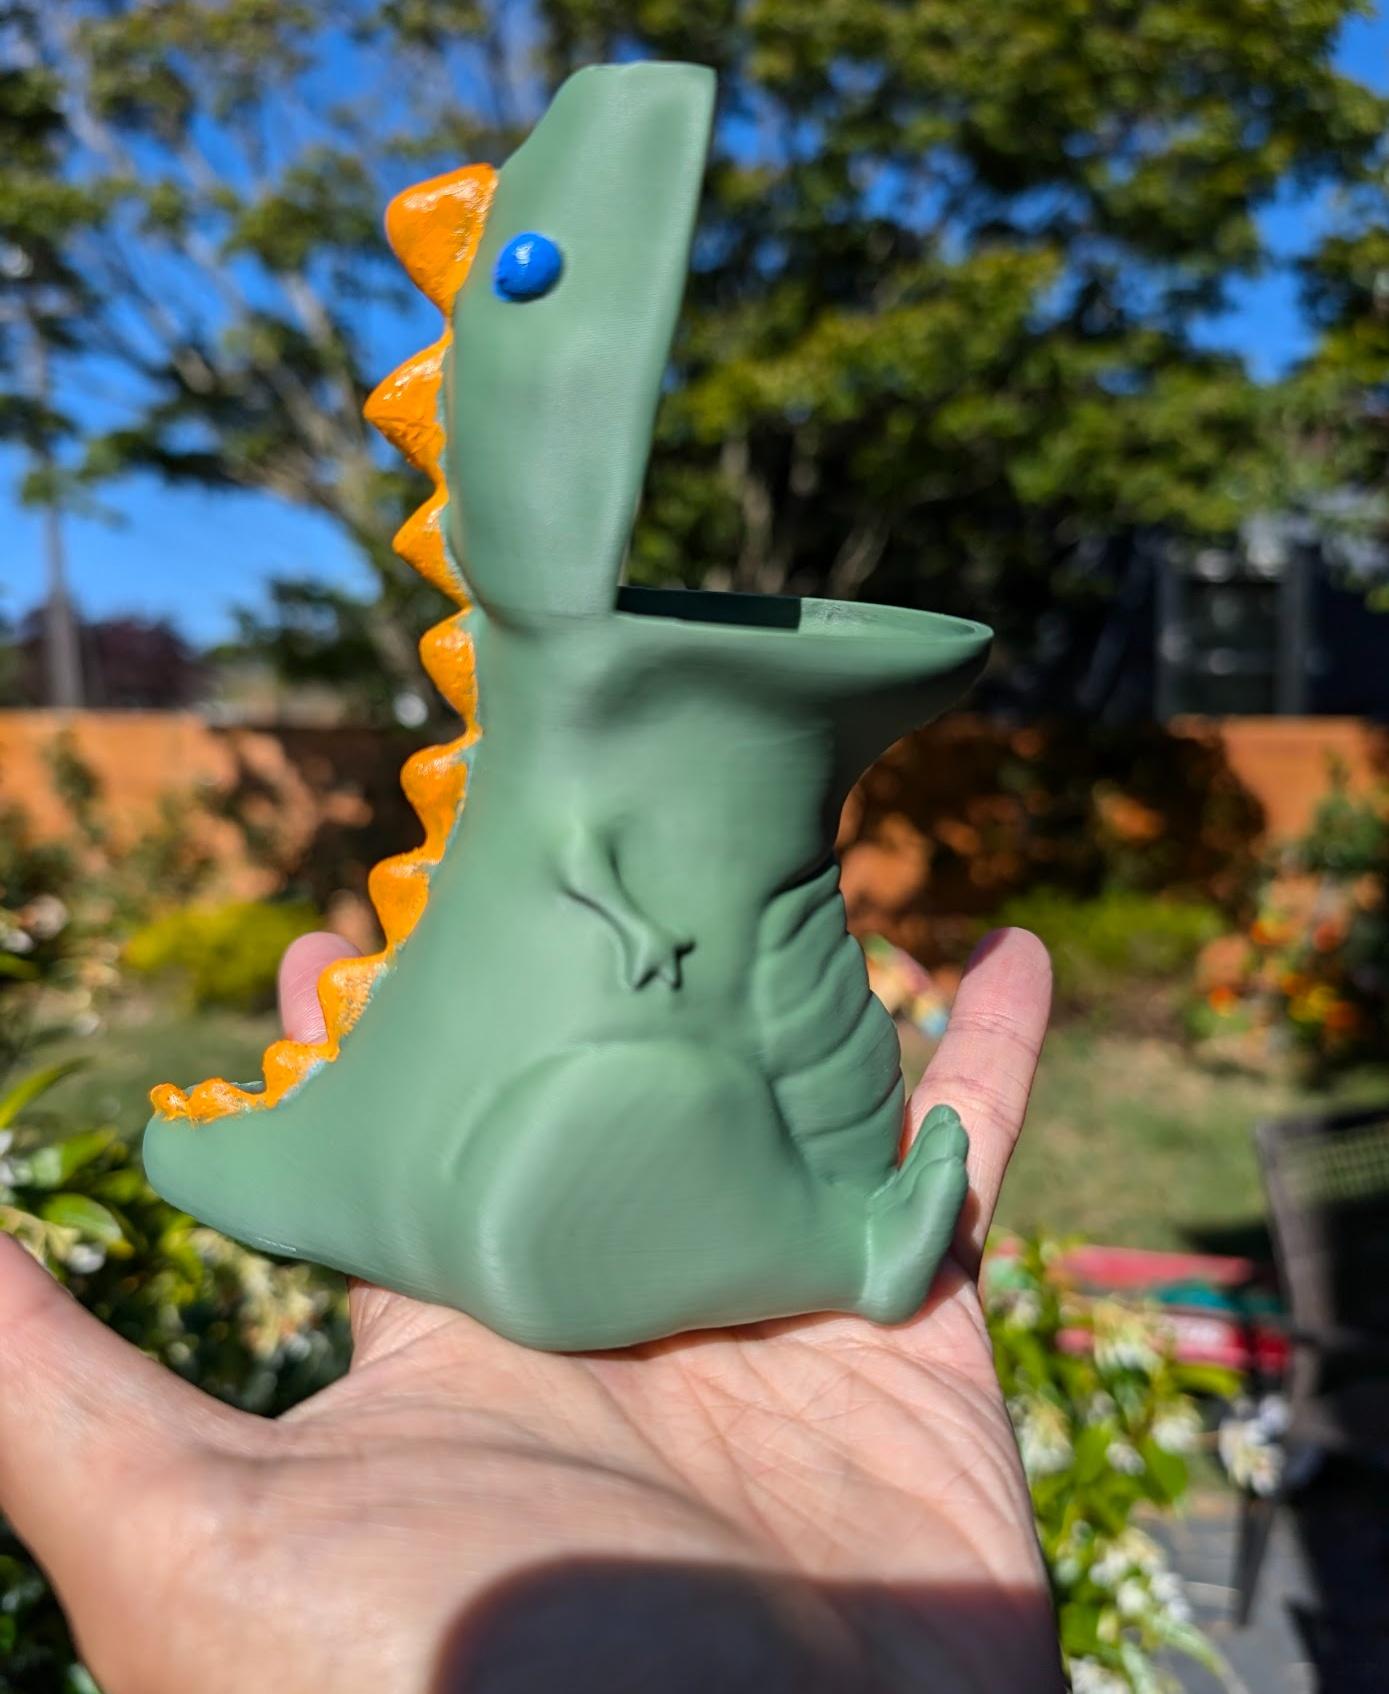 Chubby T - Last weekend was a family friend's birthday, so I made this whimsical pen holder! Great as a kid's birthday gift :) - 3d model